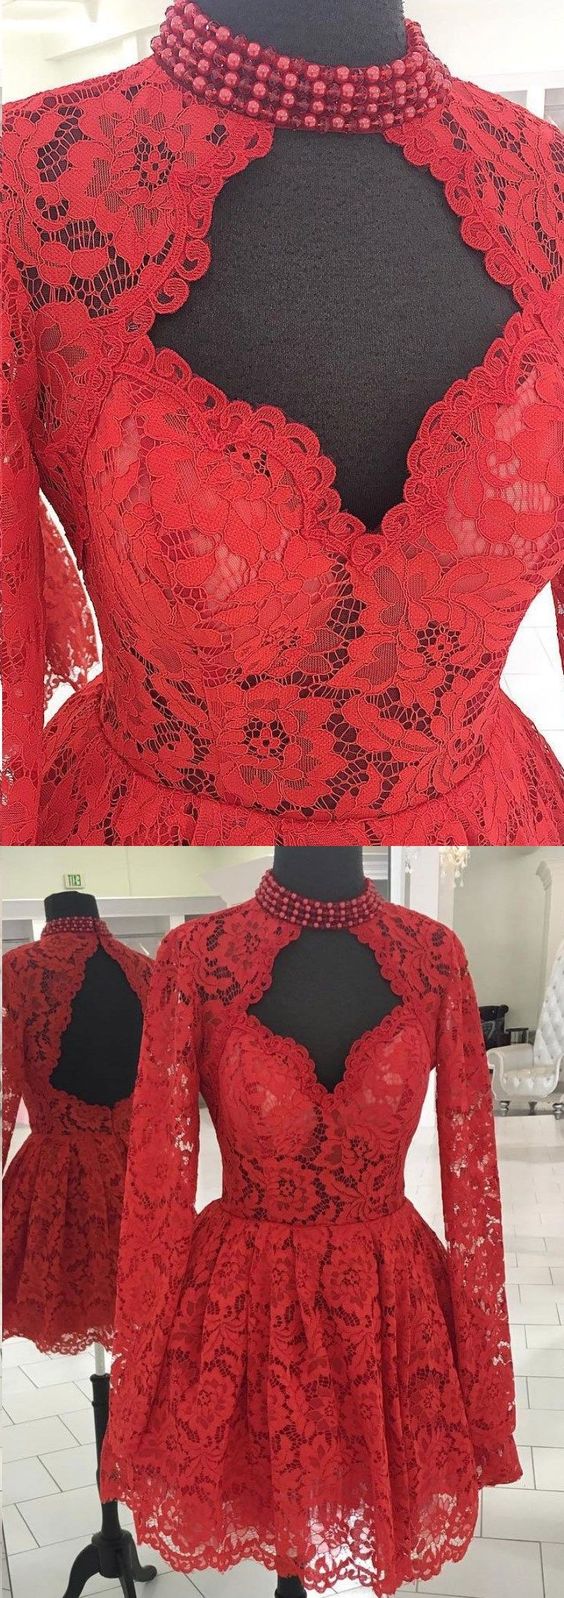 A-line High Neck Long Sleeve Homecoming Dress Red Lace Short Prom Dress